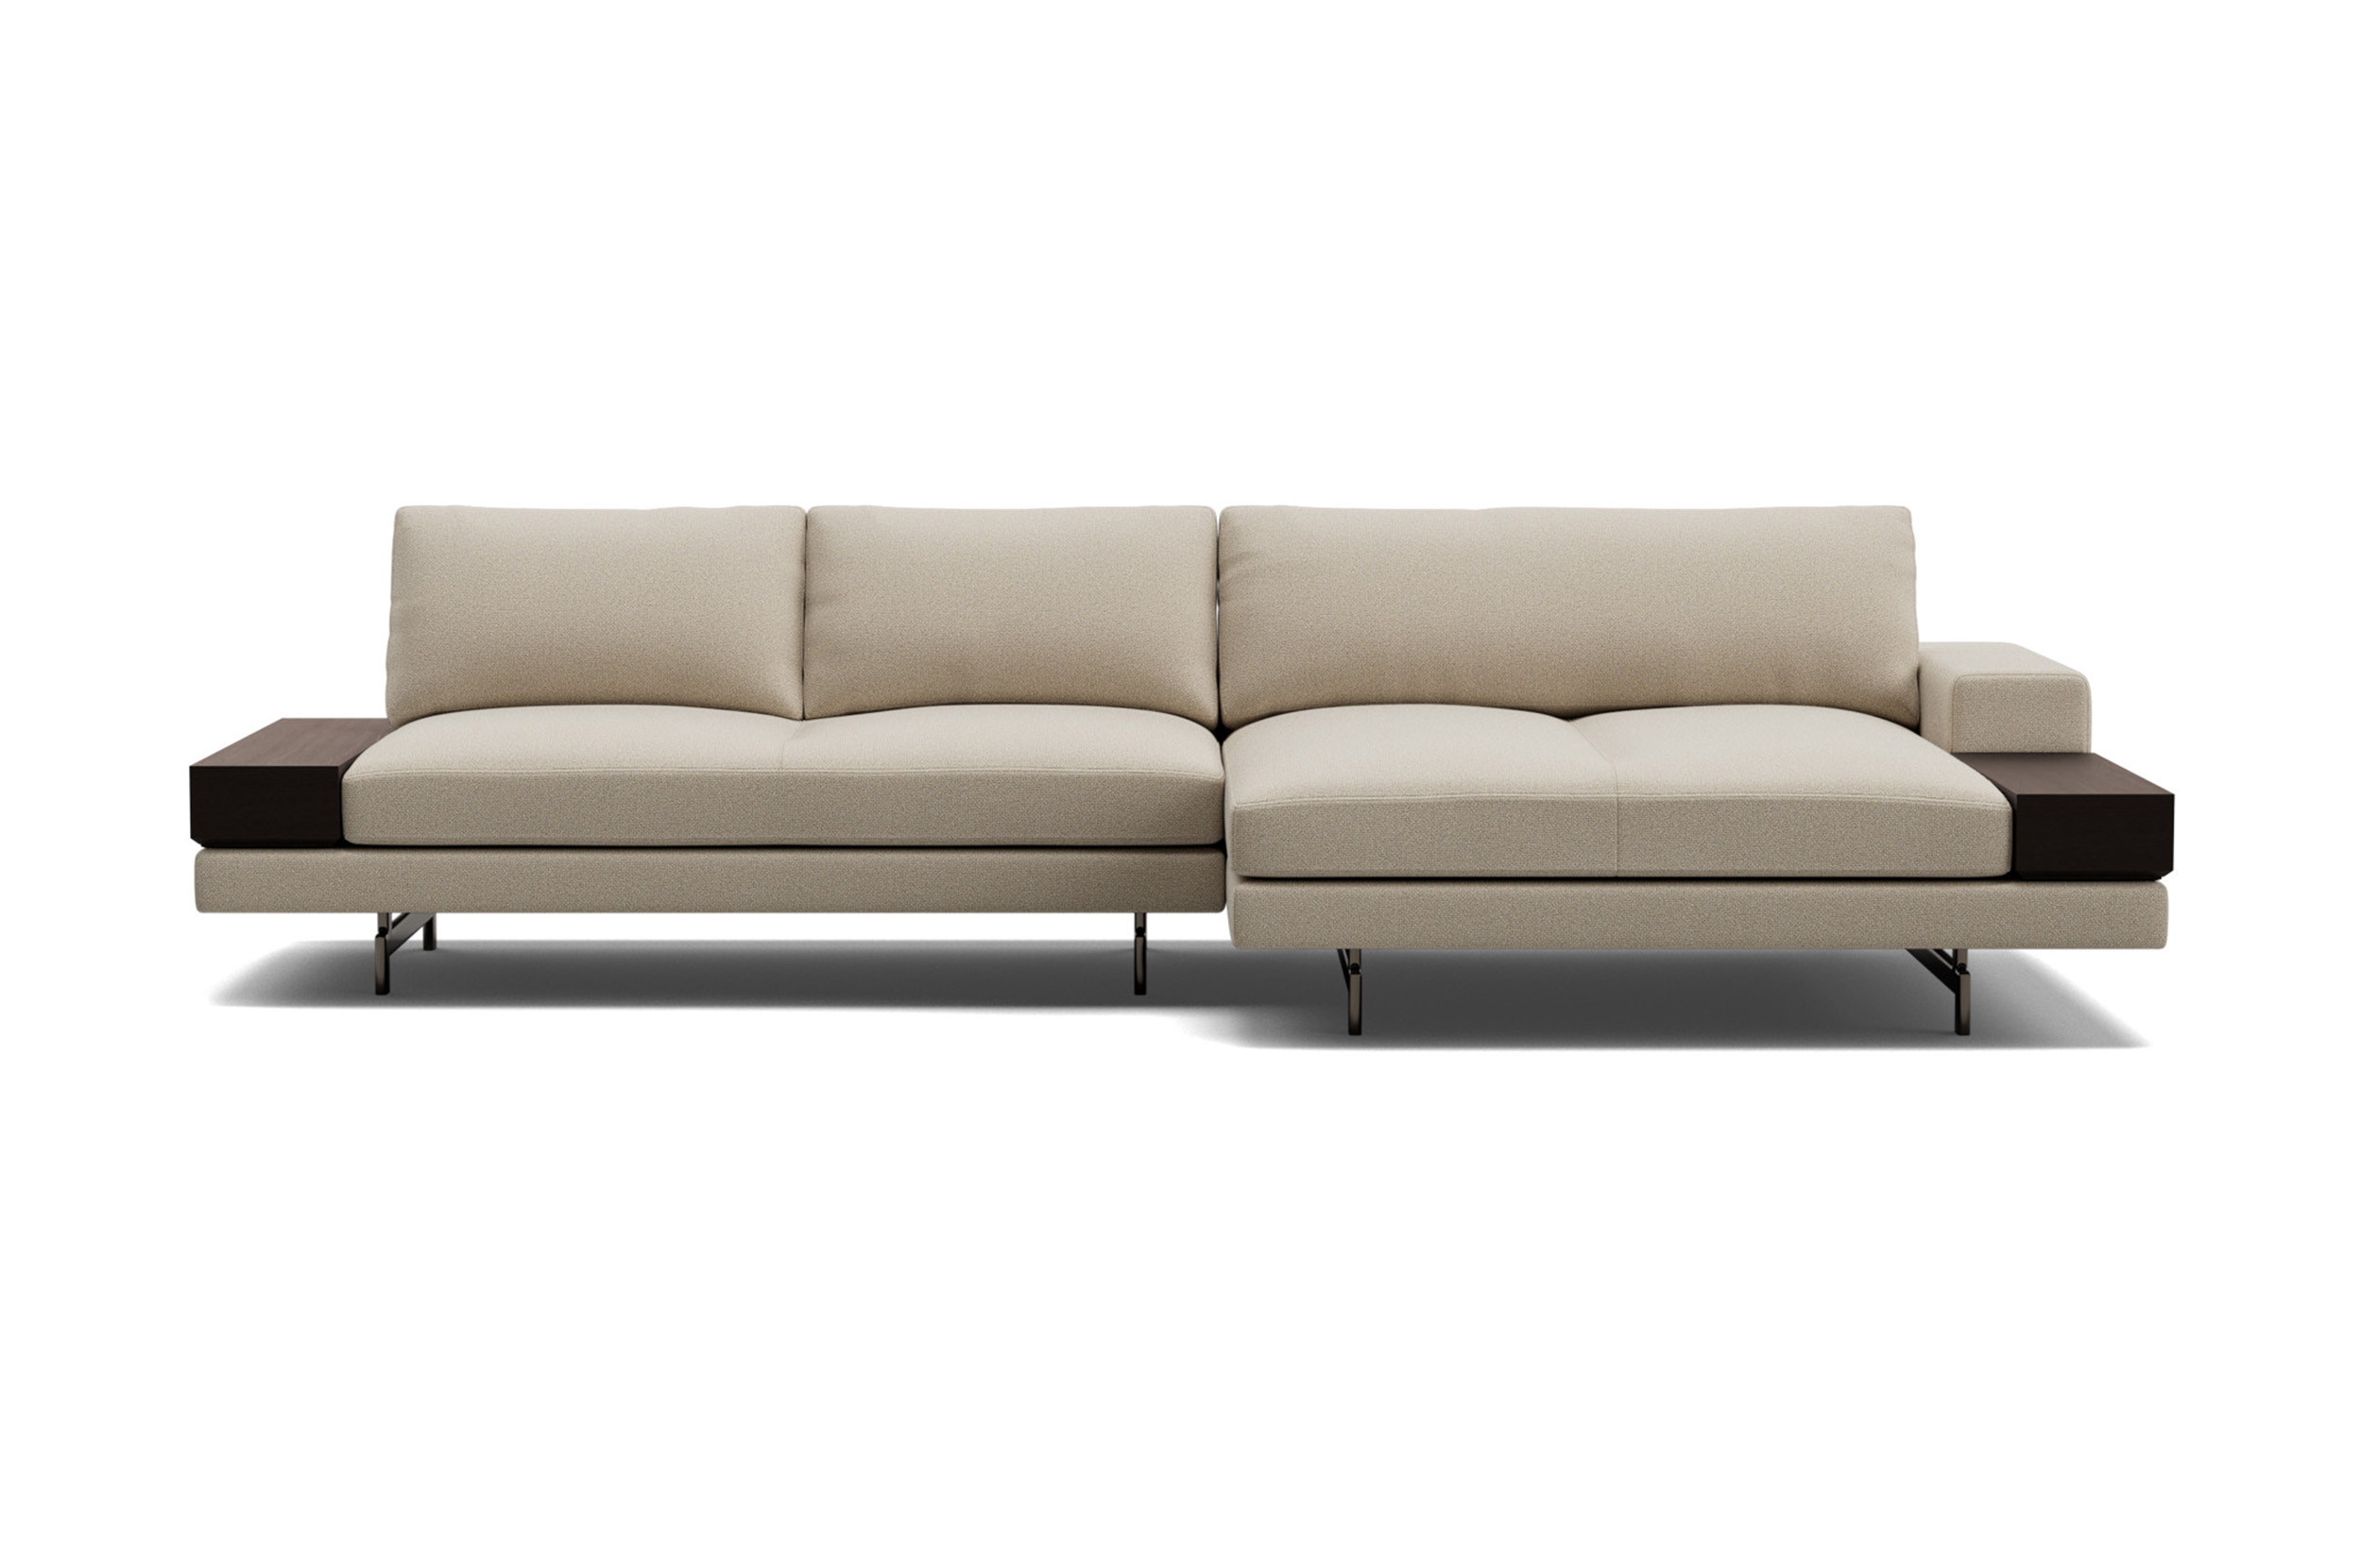 Kato 4-Seater Sofa with Double Chaise